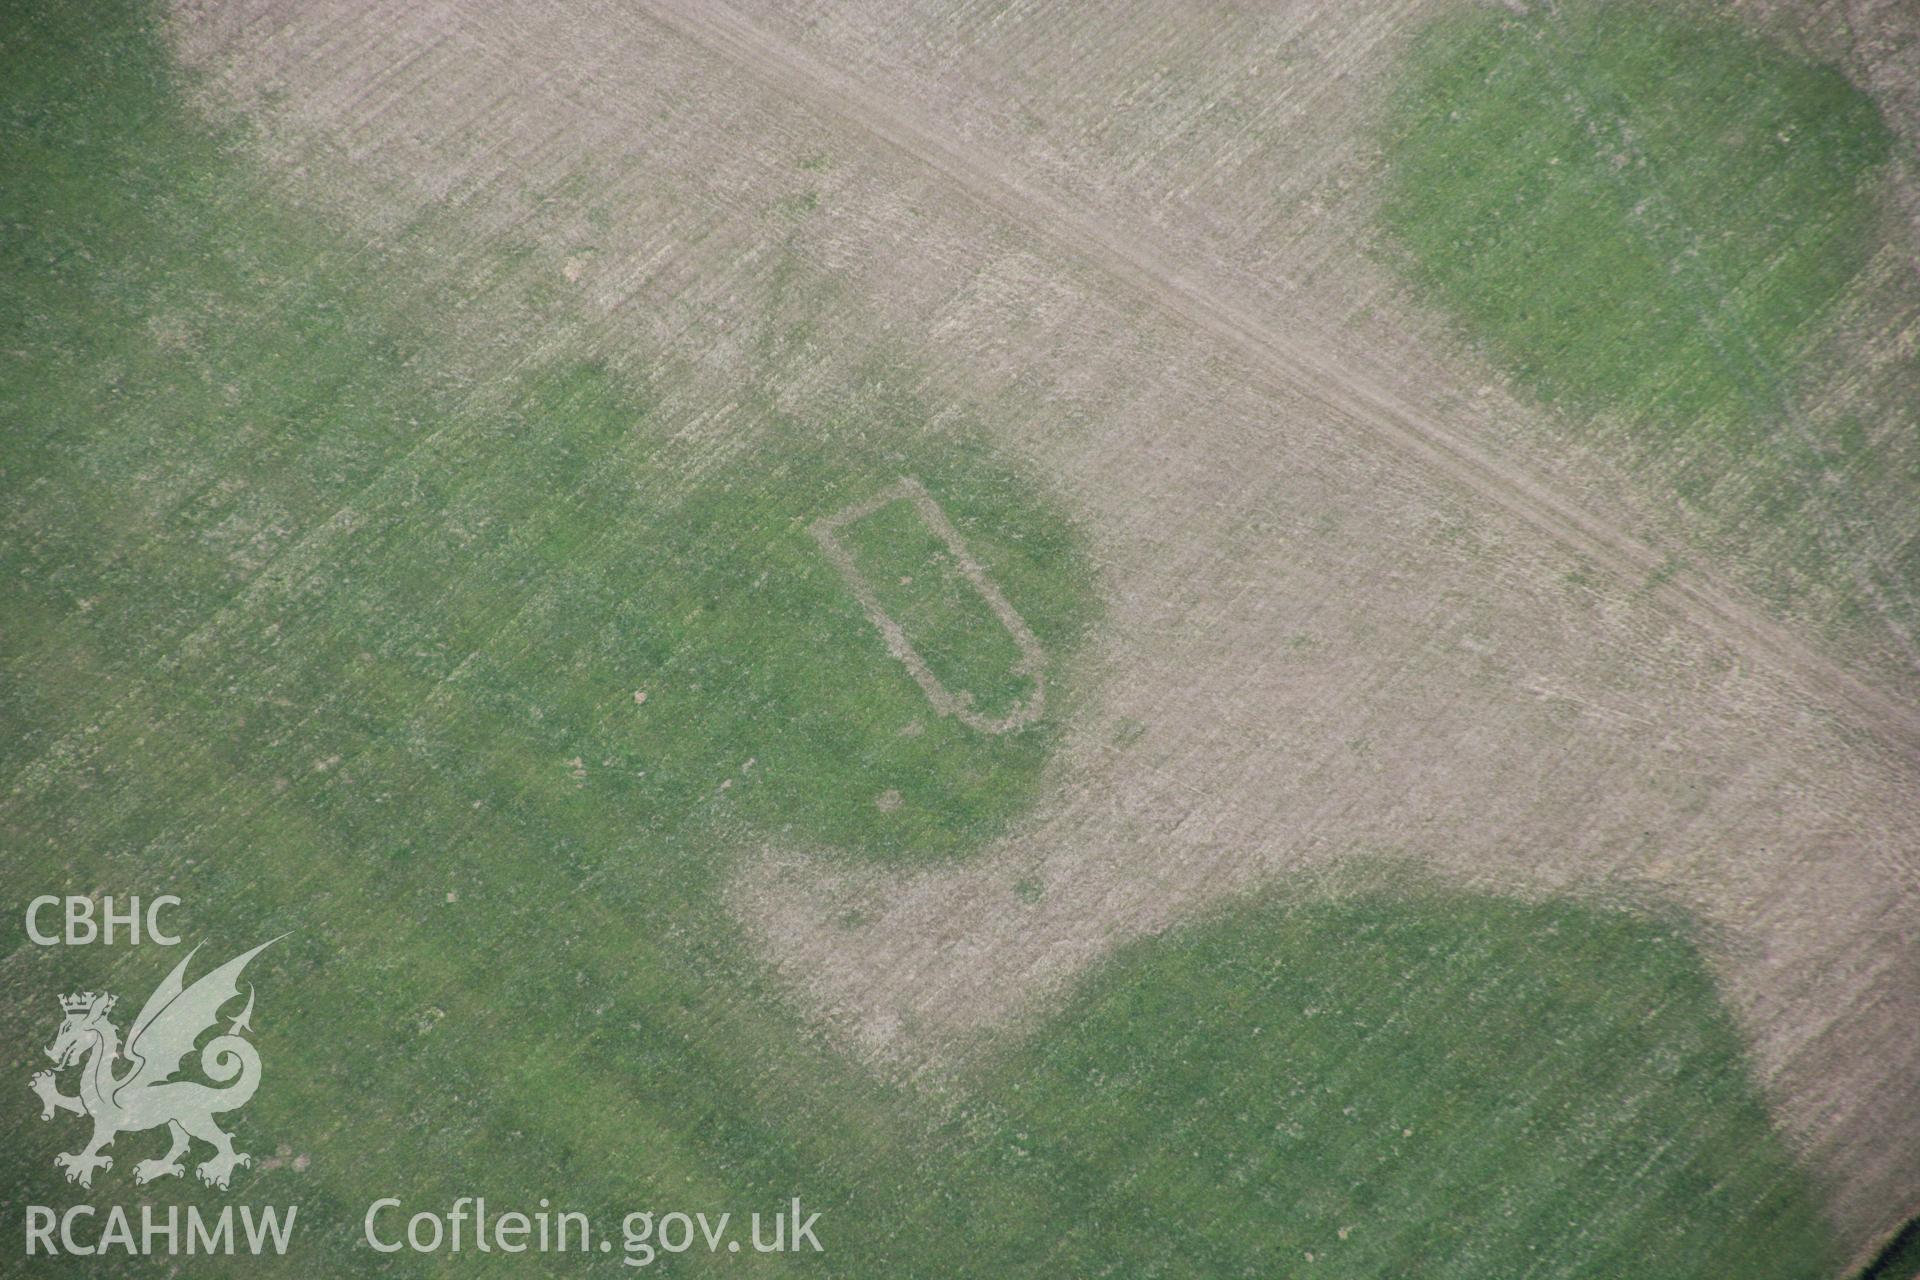 RCAHMW colour oblique aerial photograph of Llwydfaen Medieval Township, site of buried medieval church, view of parched foundations from south-west, taken on 14/08/2006 by Toby Driver.